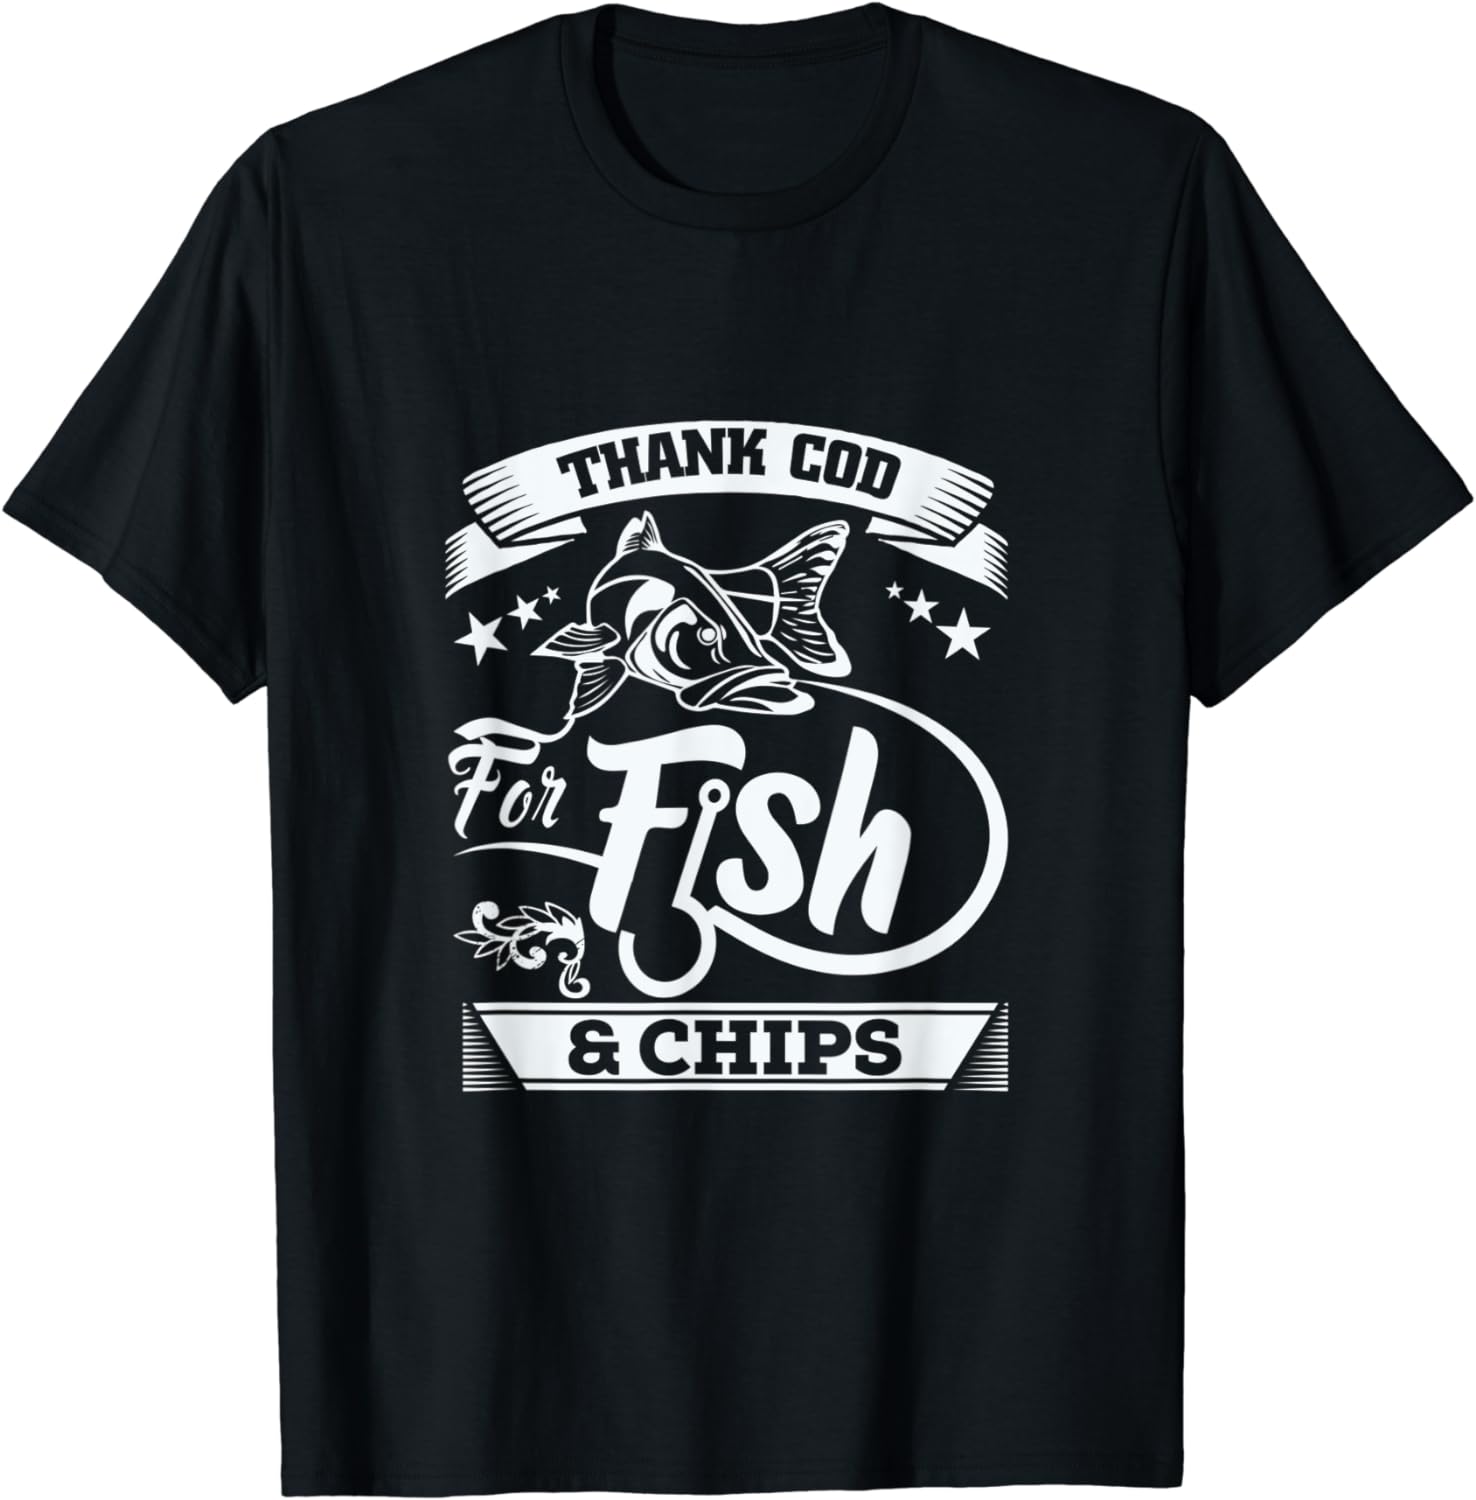 Thank Cod for Fish & Chips T-Shirt